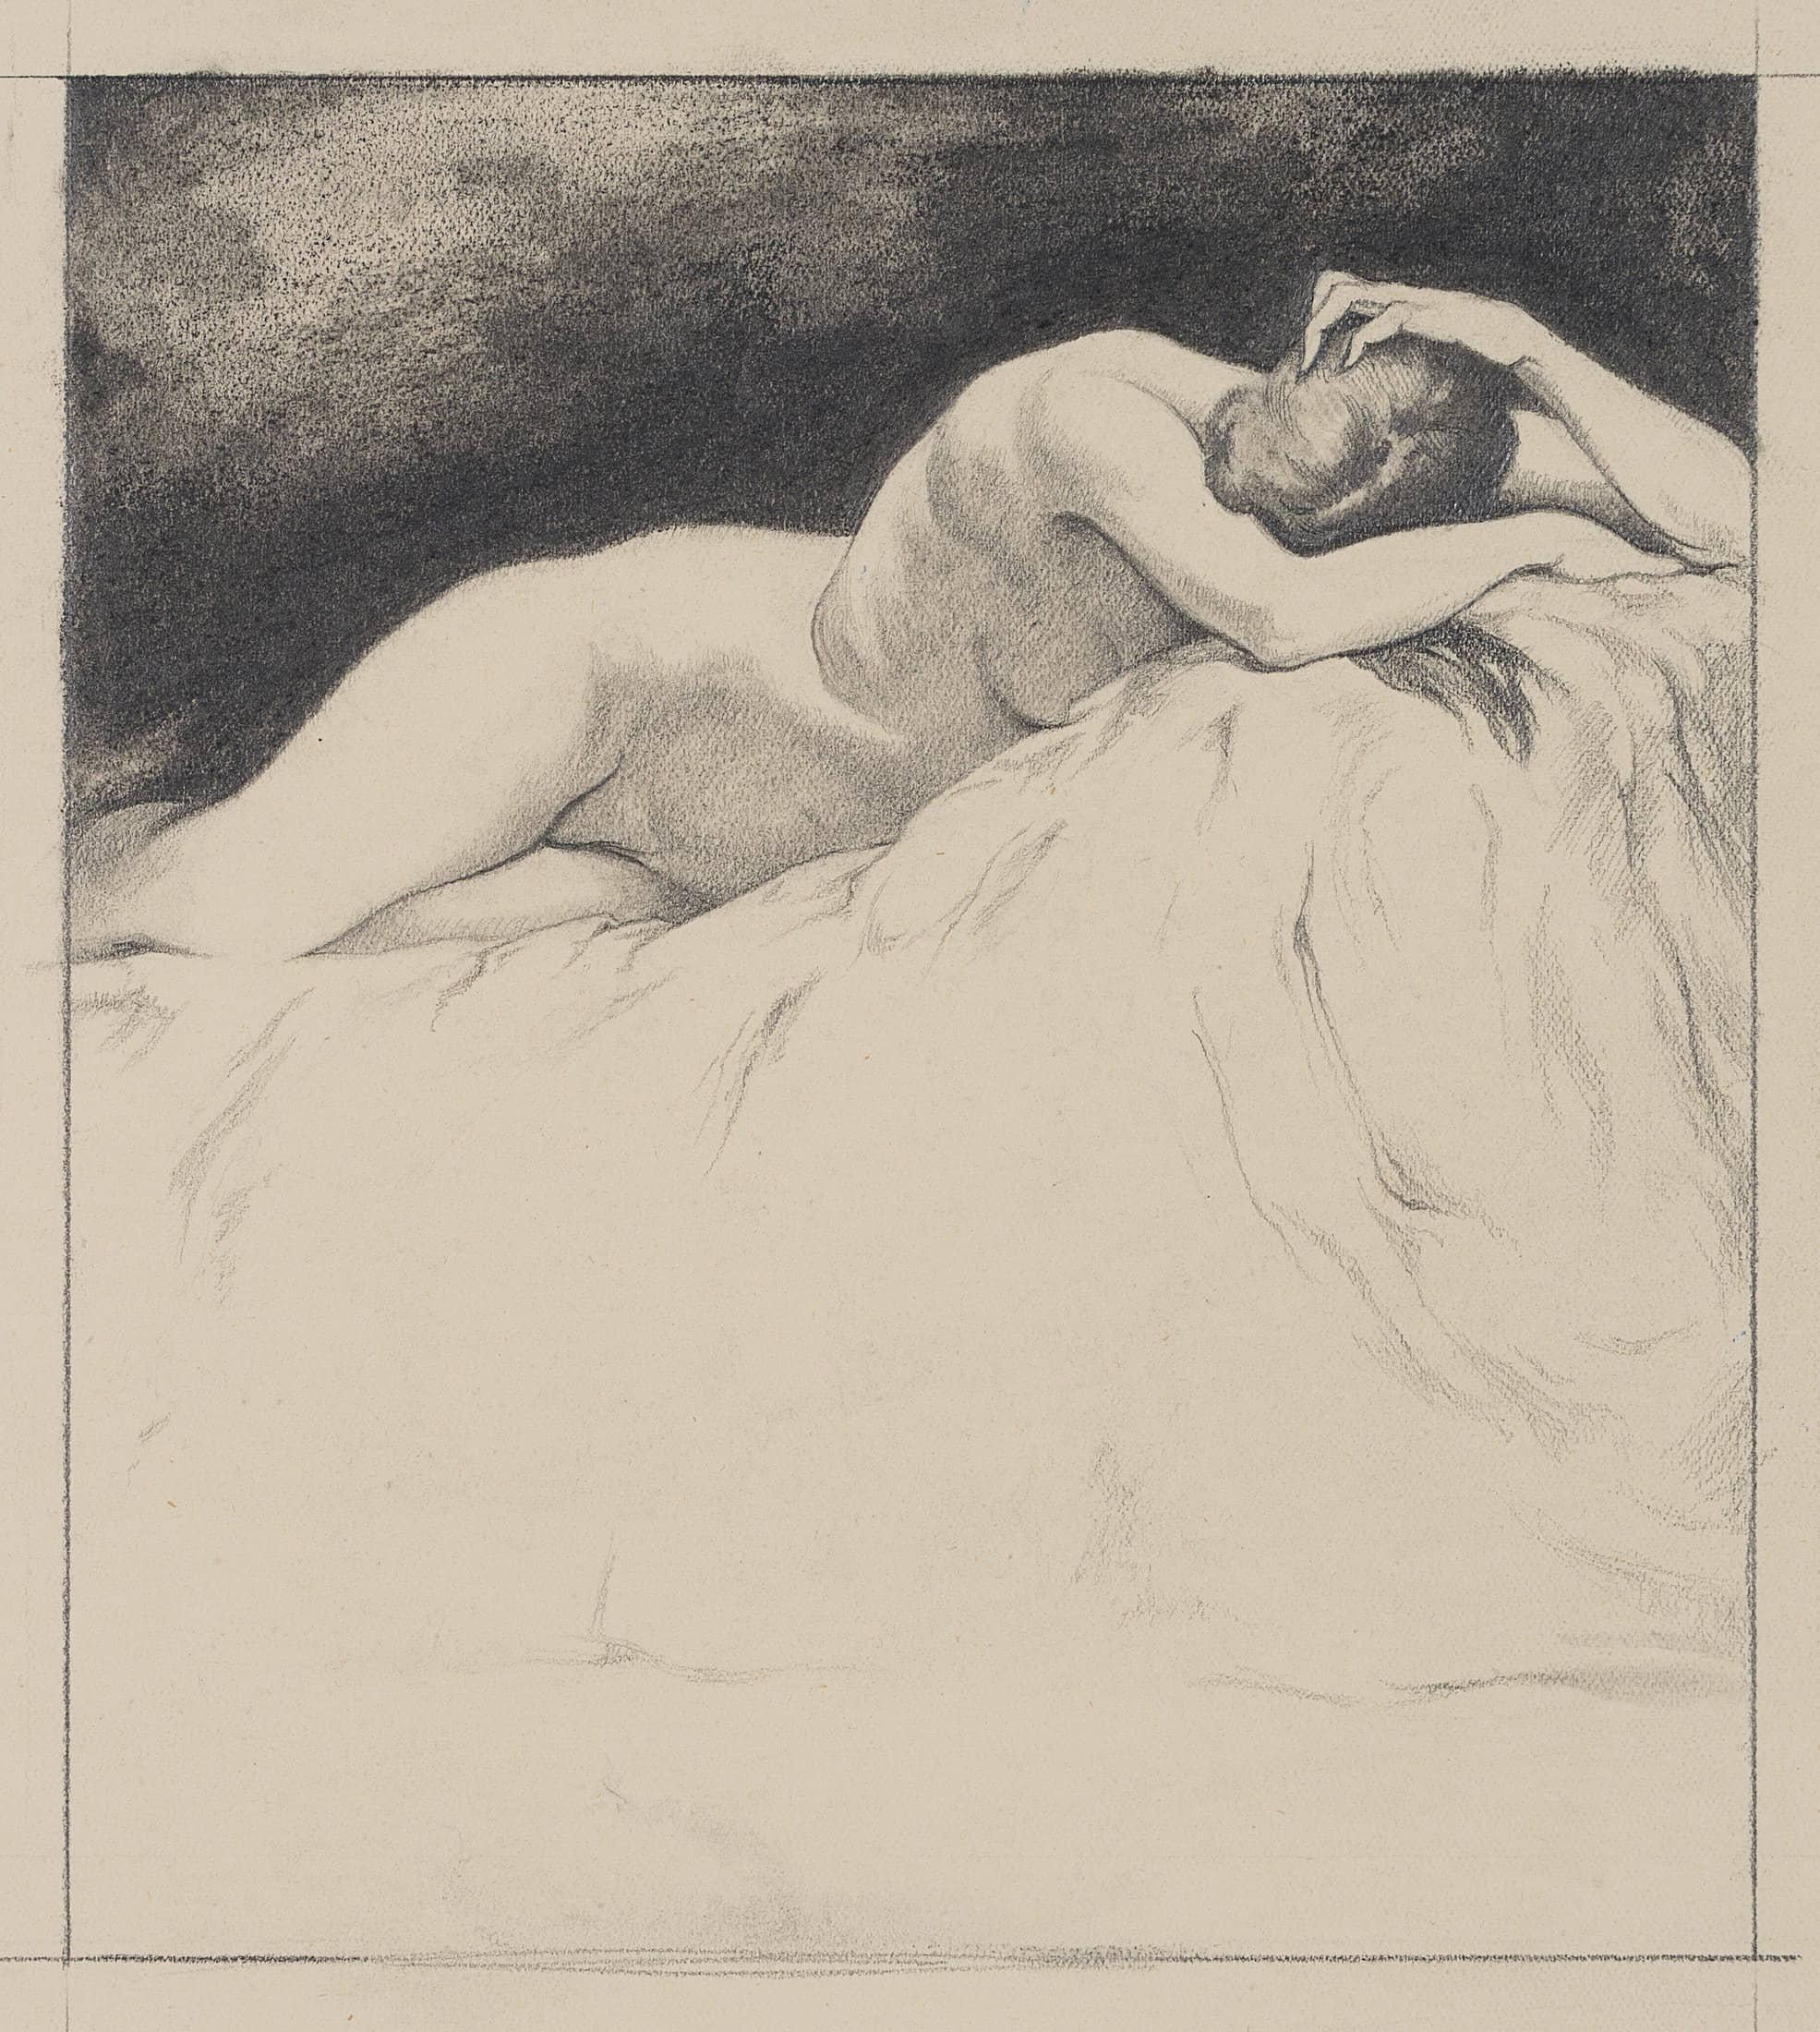 Carl August Walther (1880 Leipzig - 1956 Dresden): Sleeping III, 20th century, Pencil

Technique: Pencil and Charcoal on Paper

Inscription: below with estate stamp

Date: 20th century

Description: View of an unclothed woman lying turned away on a